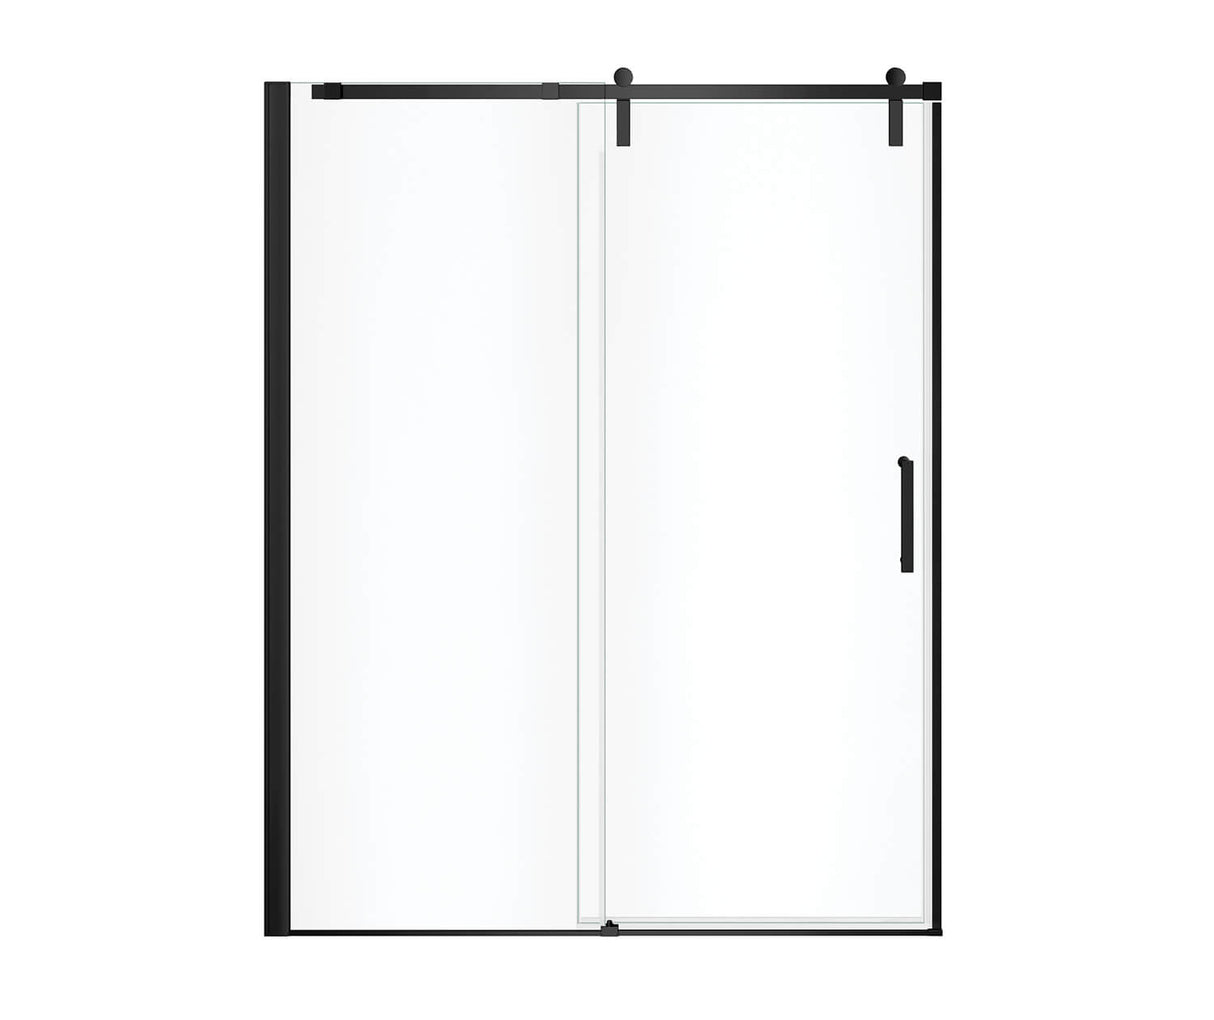 MAAX 137681-900-340-000 Outback 55 ¼ - 58 ½ x 70 ½ in. 8mm Sliding Shower Door for Alcove Installation with Clear glass in Matte Black